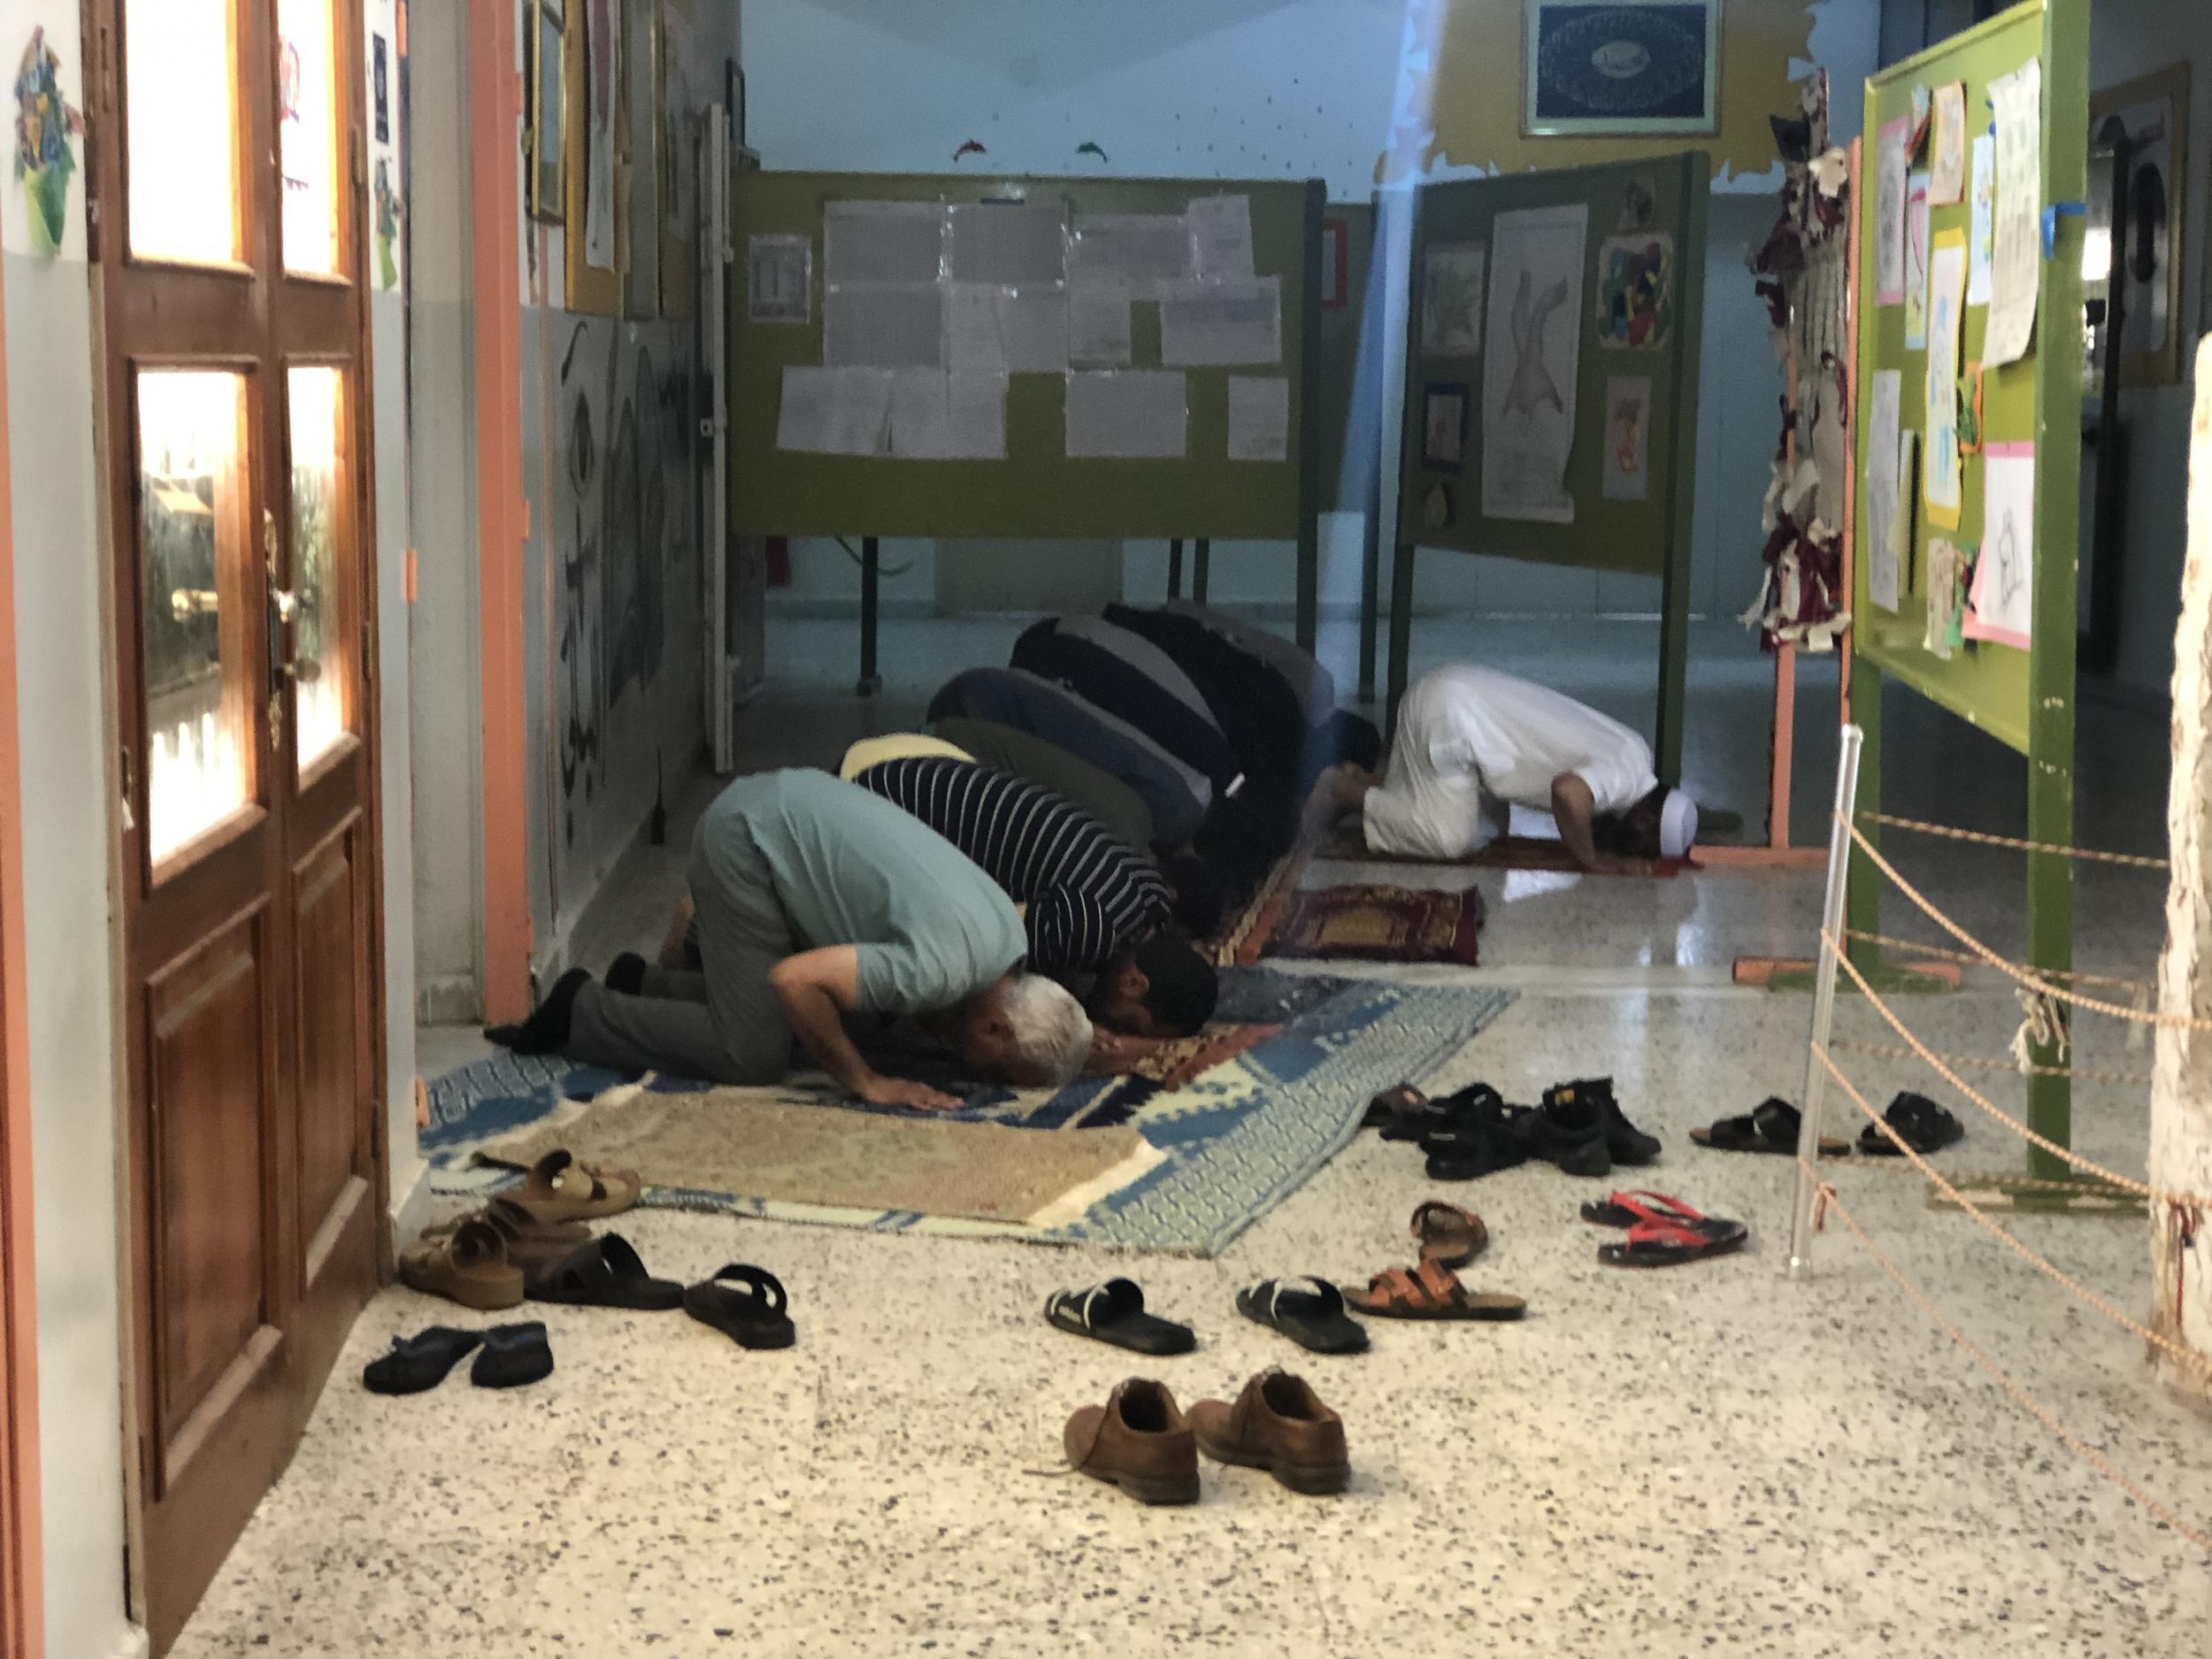 Men pray at a now shuttered school near central Tripoli, which is being used to house internally displaced people